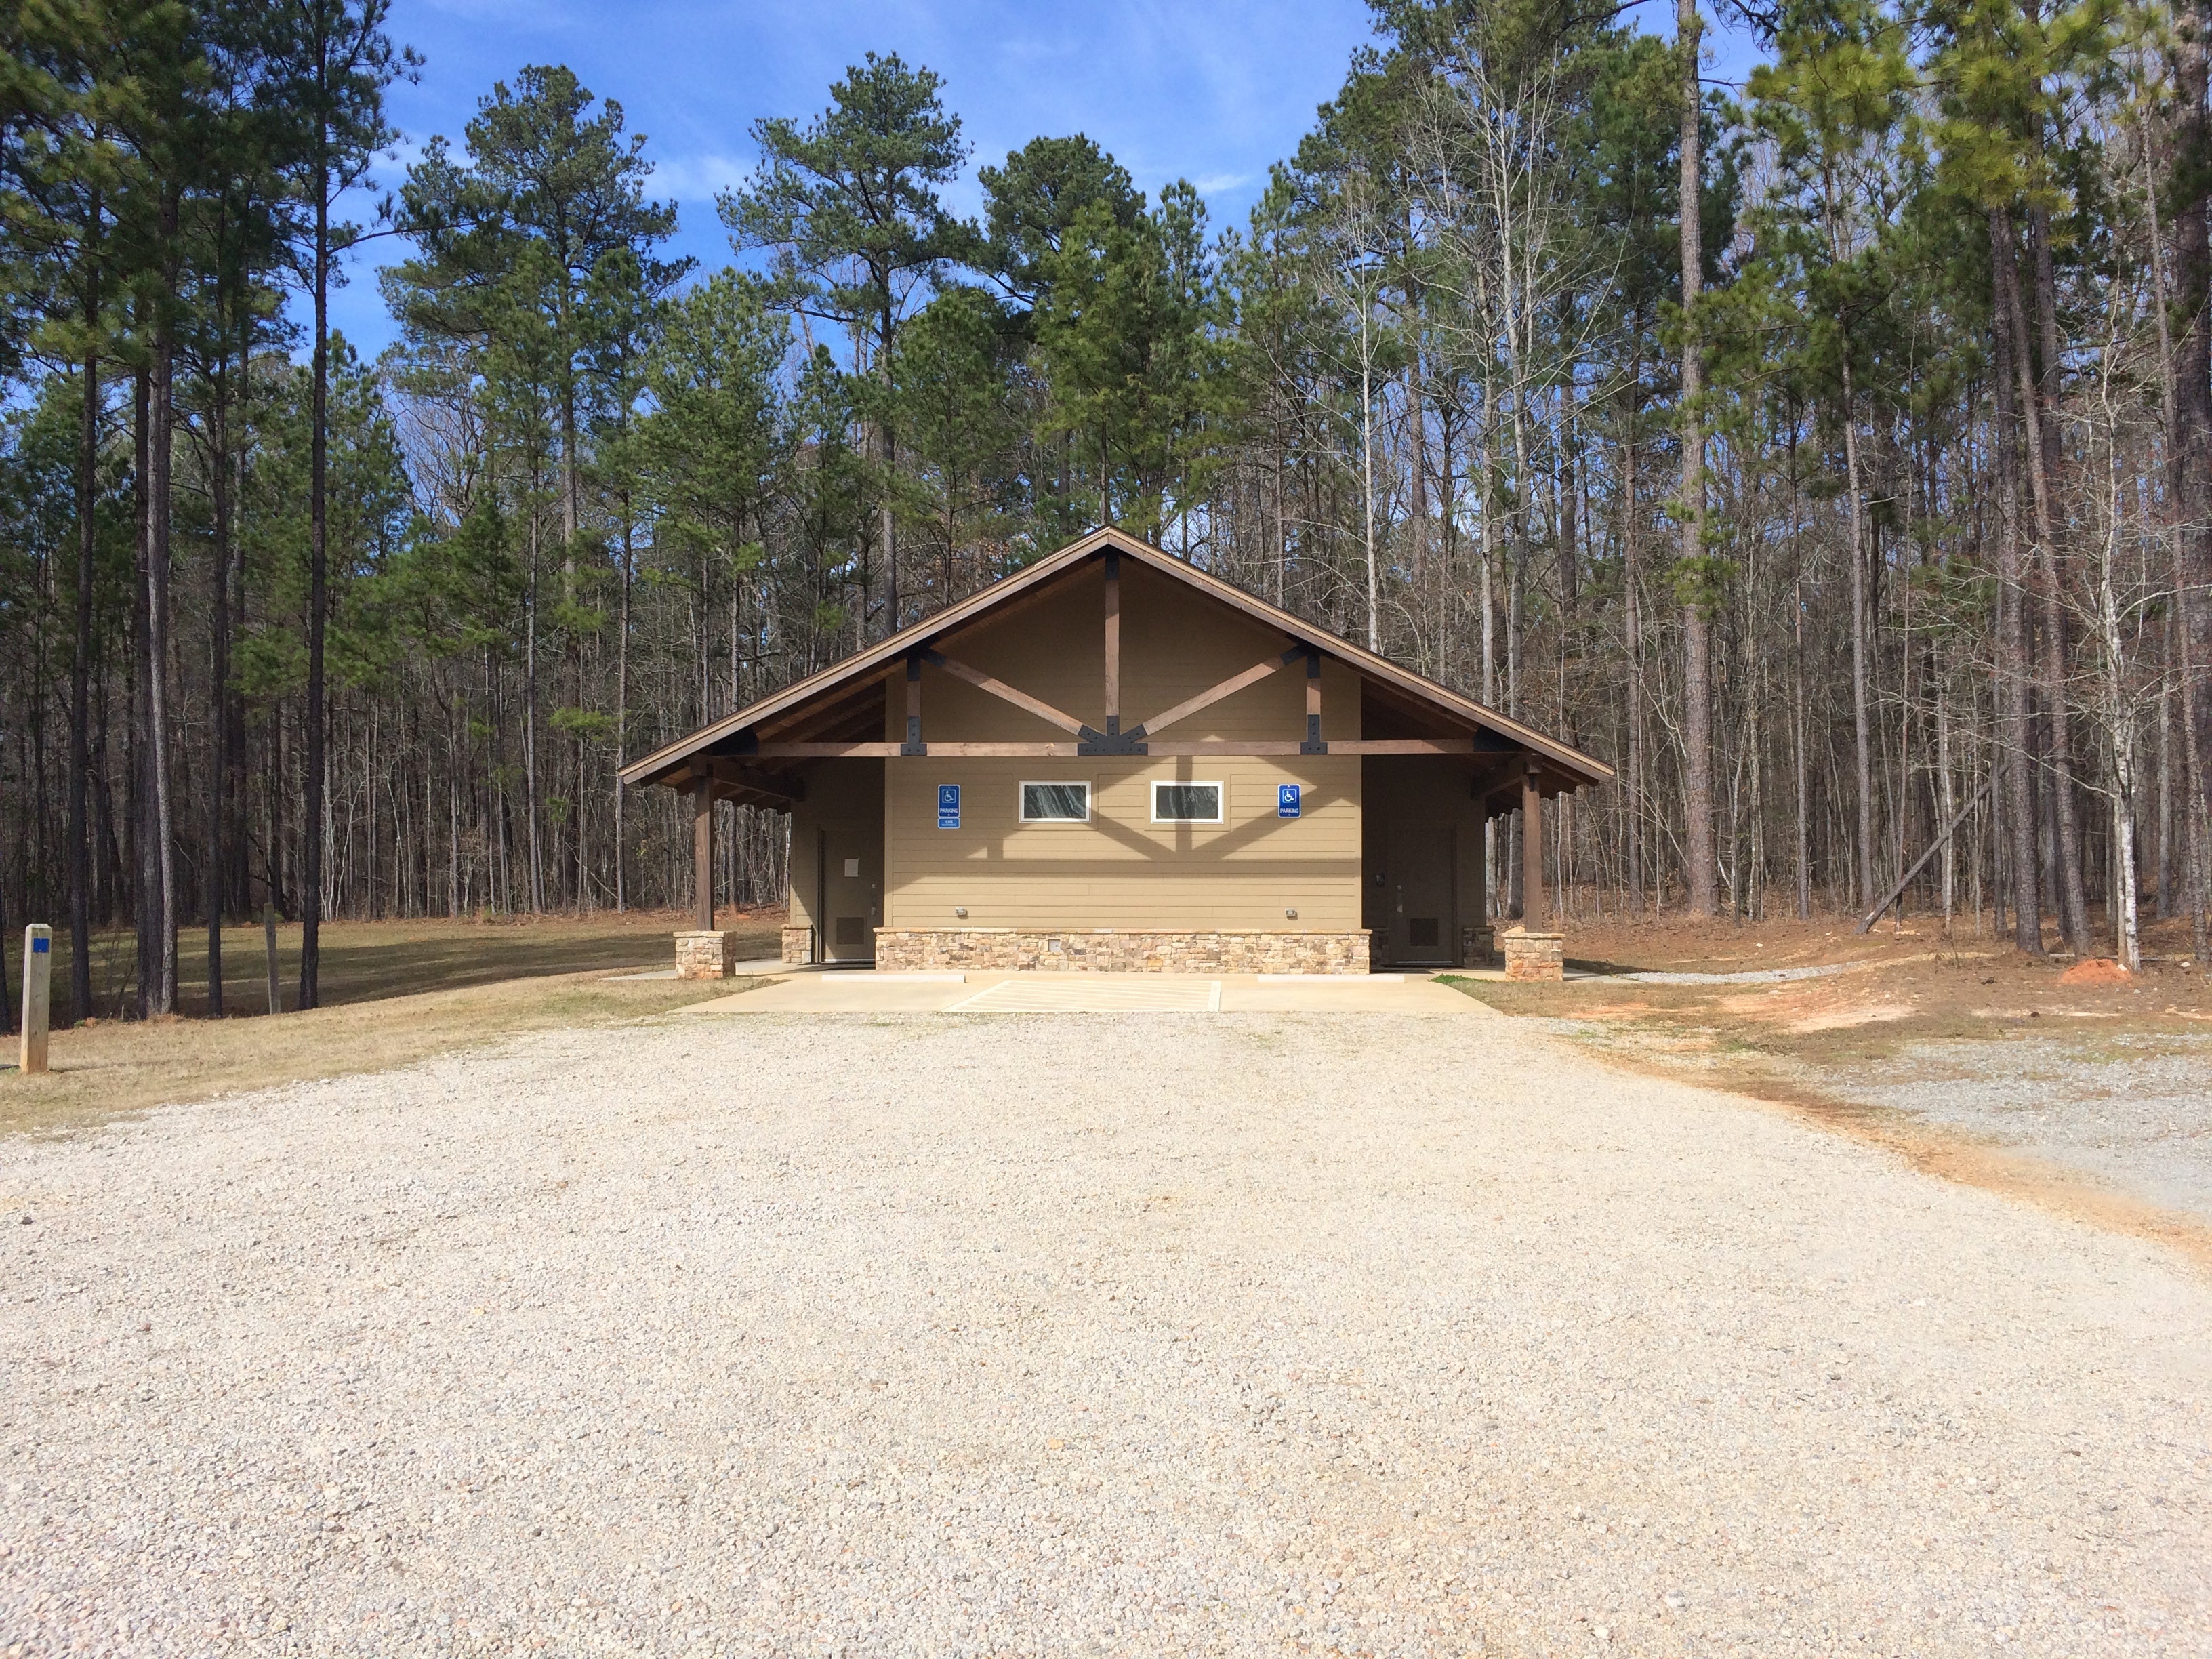 New bathhouse at equestrian campground 